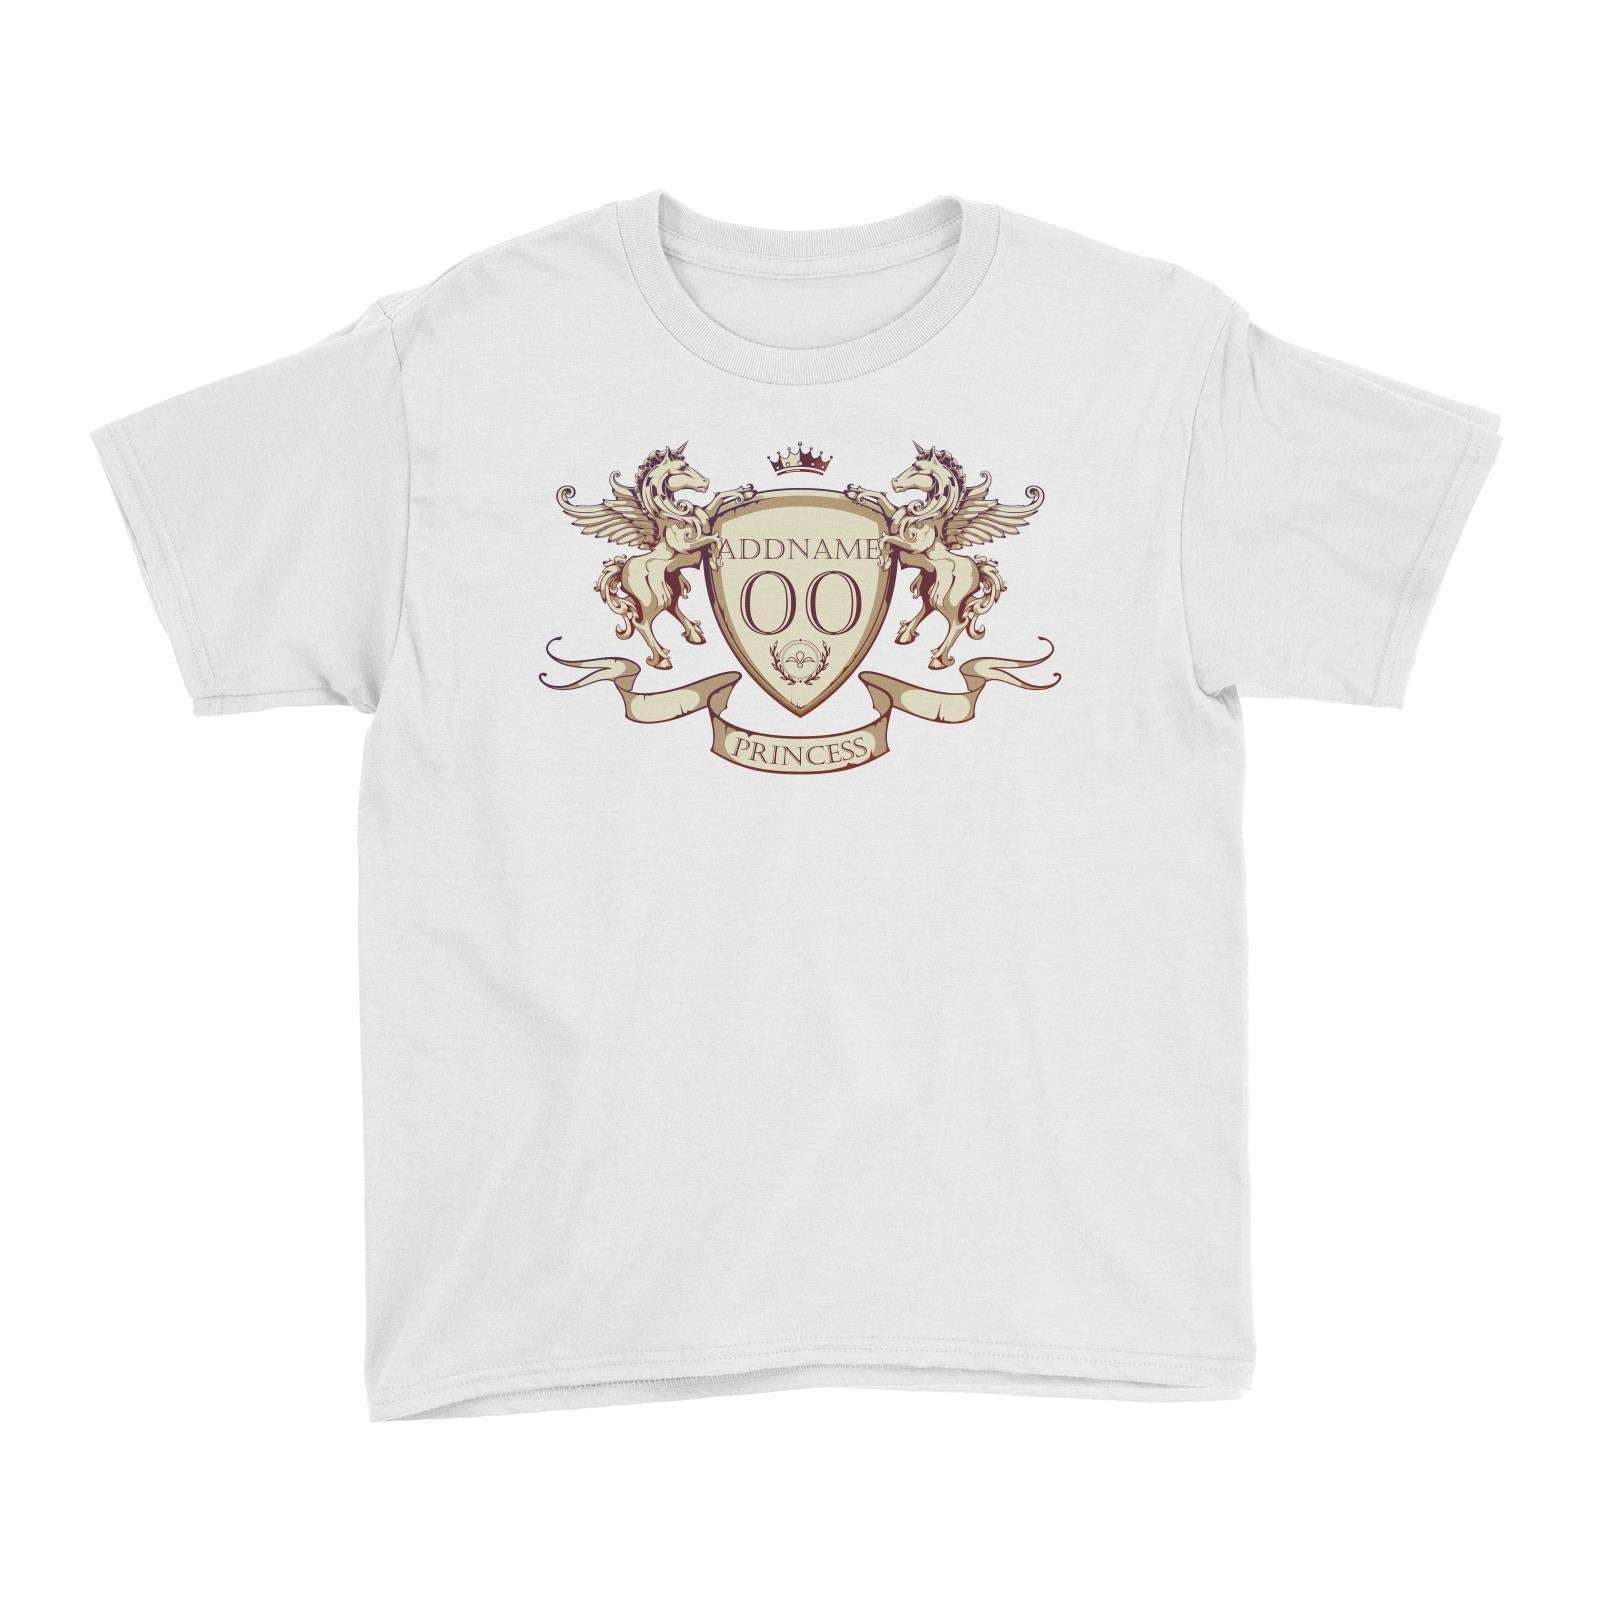 Horse Royal Emblem Princess Personalizable with Name and Number Kid's T-Shirt